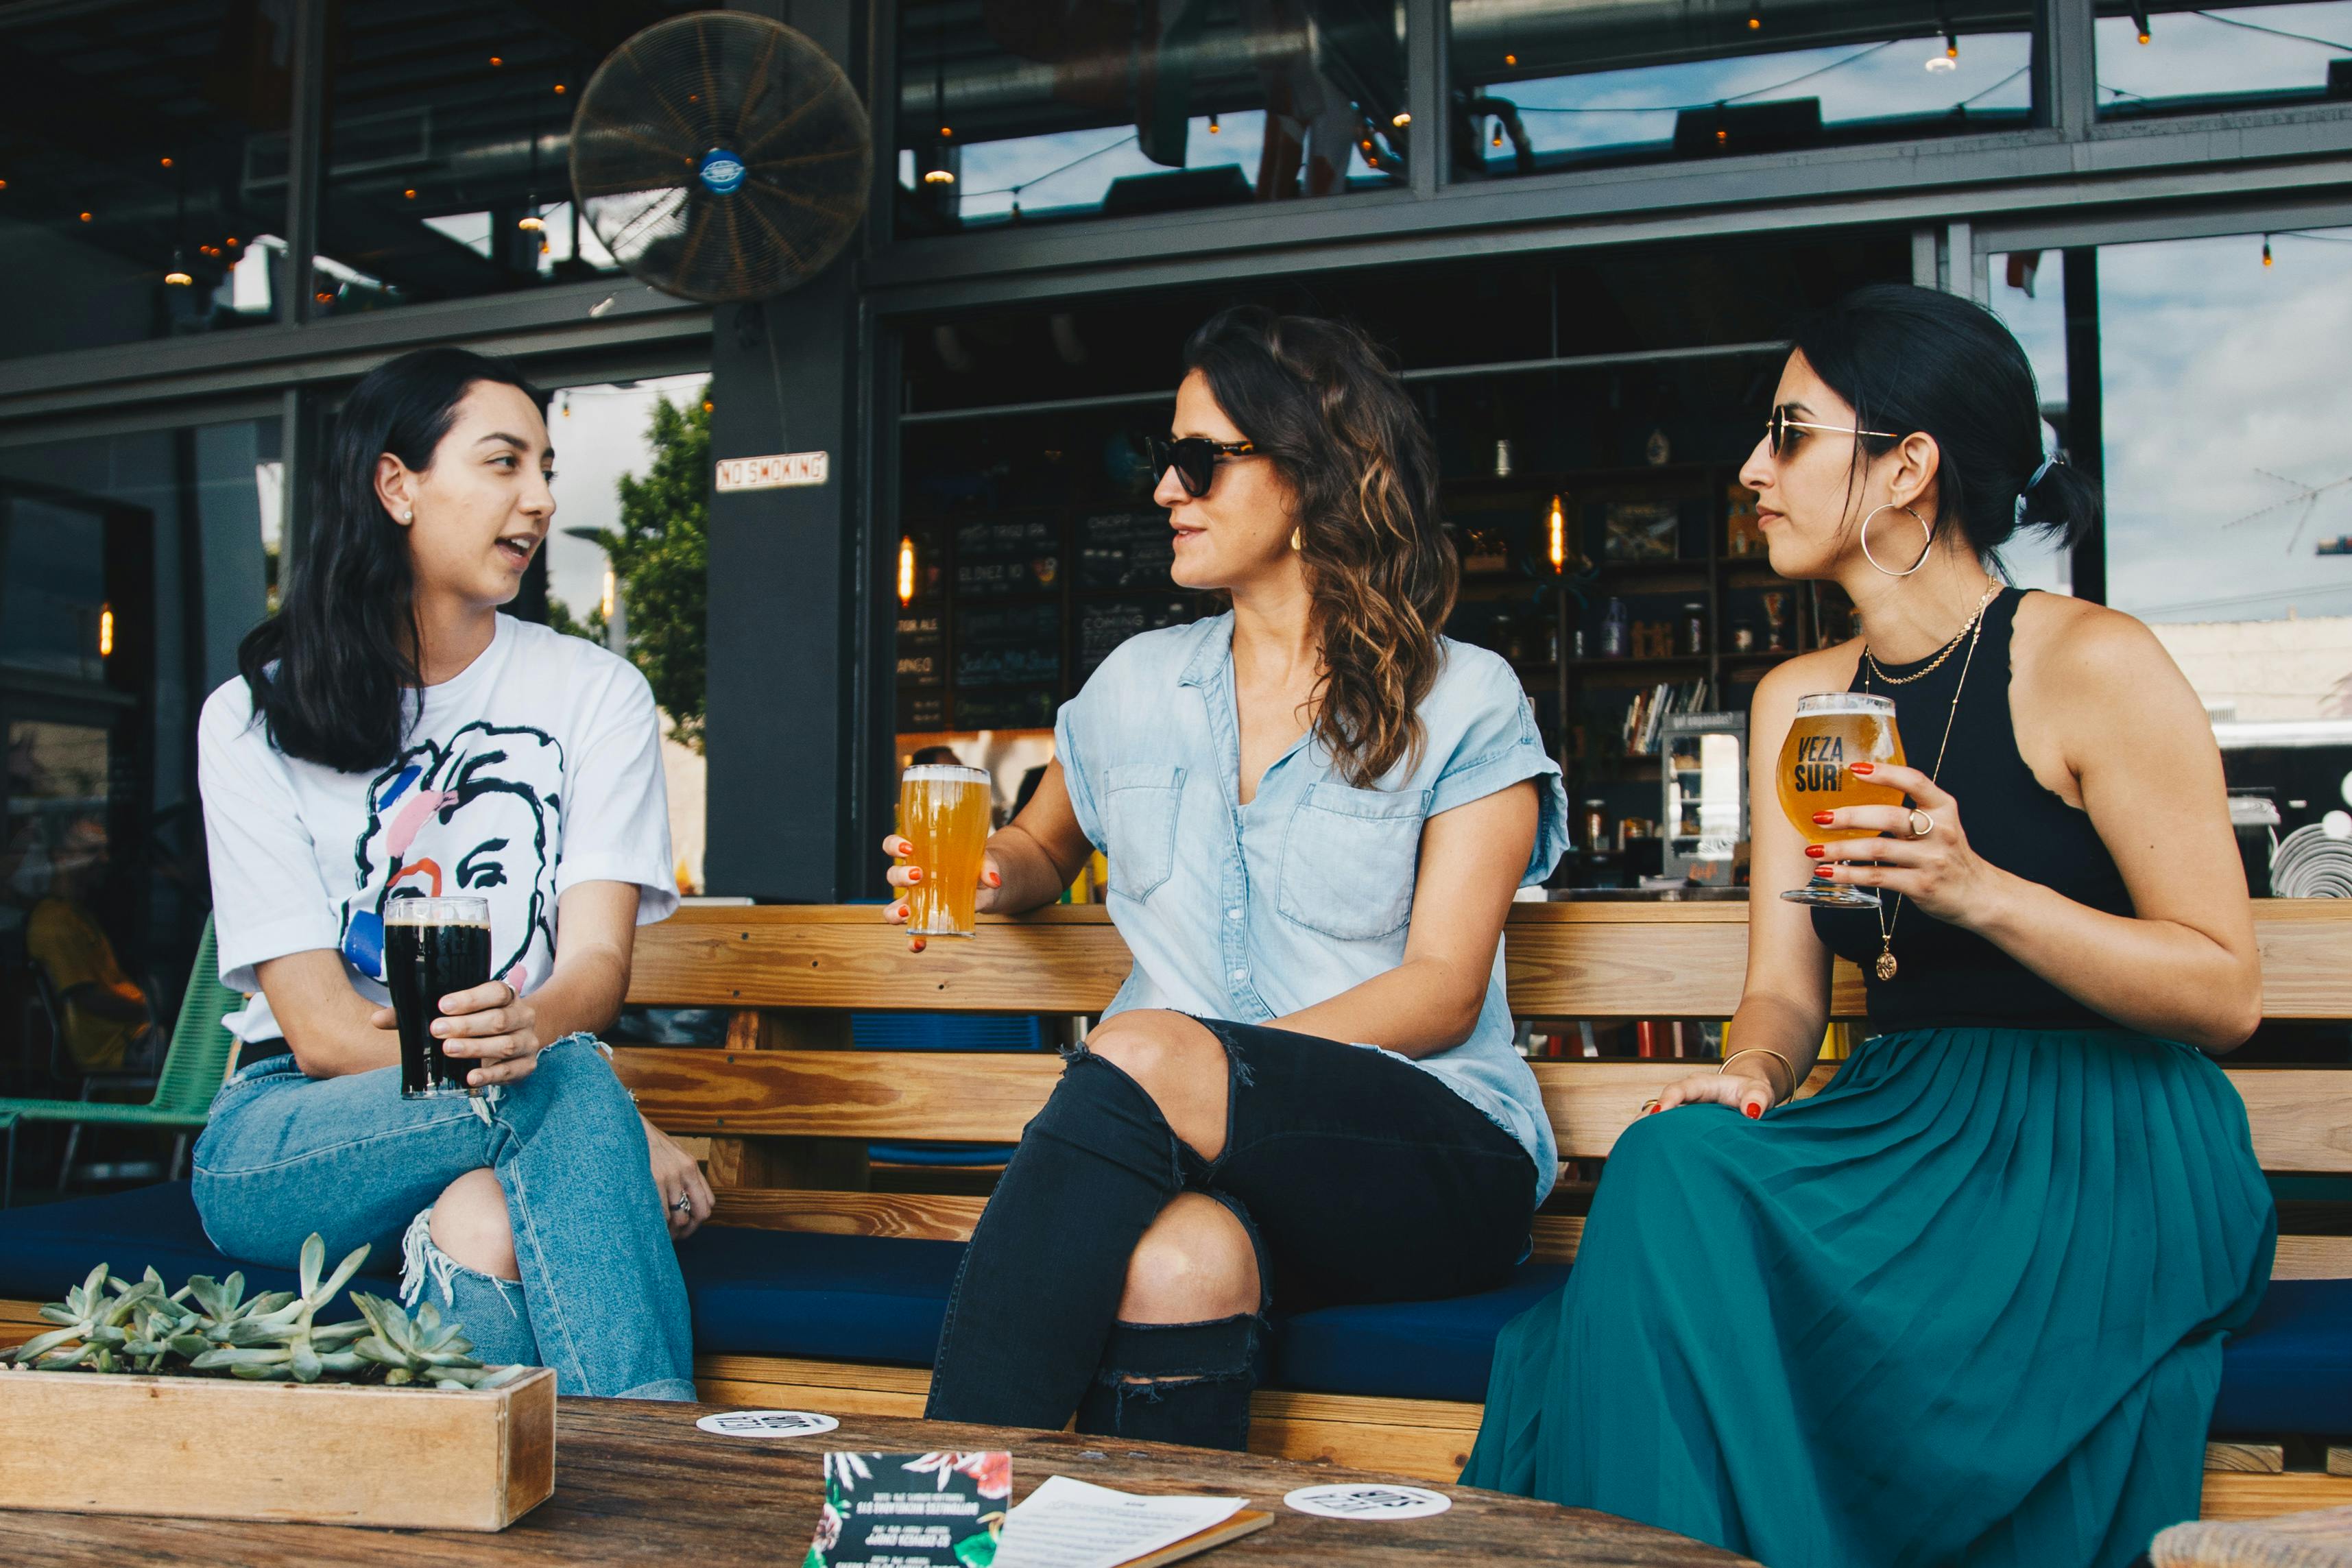 Woman hangs out with her friends | Source: Pexels